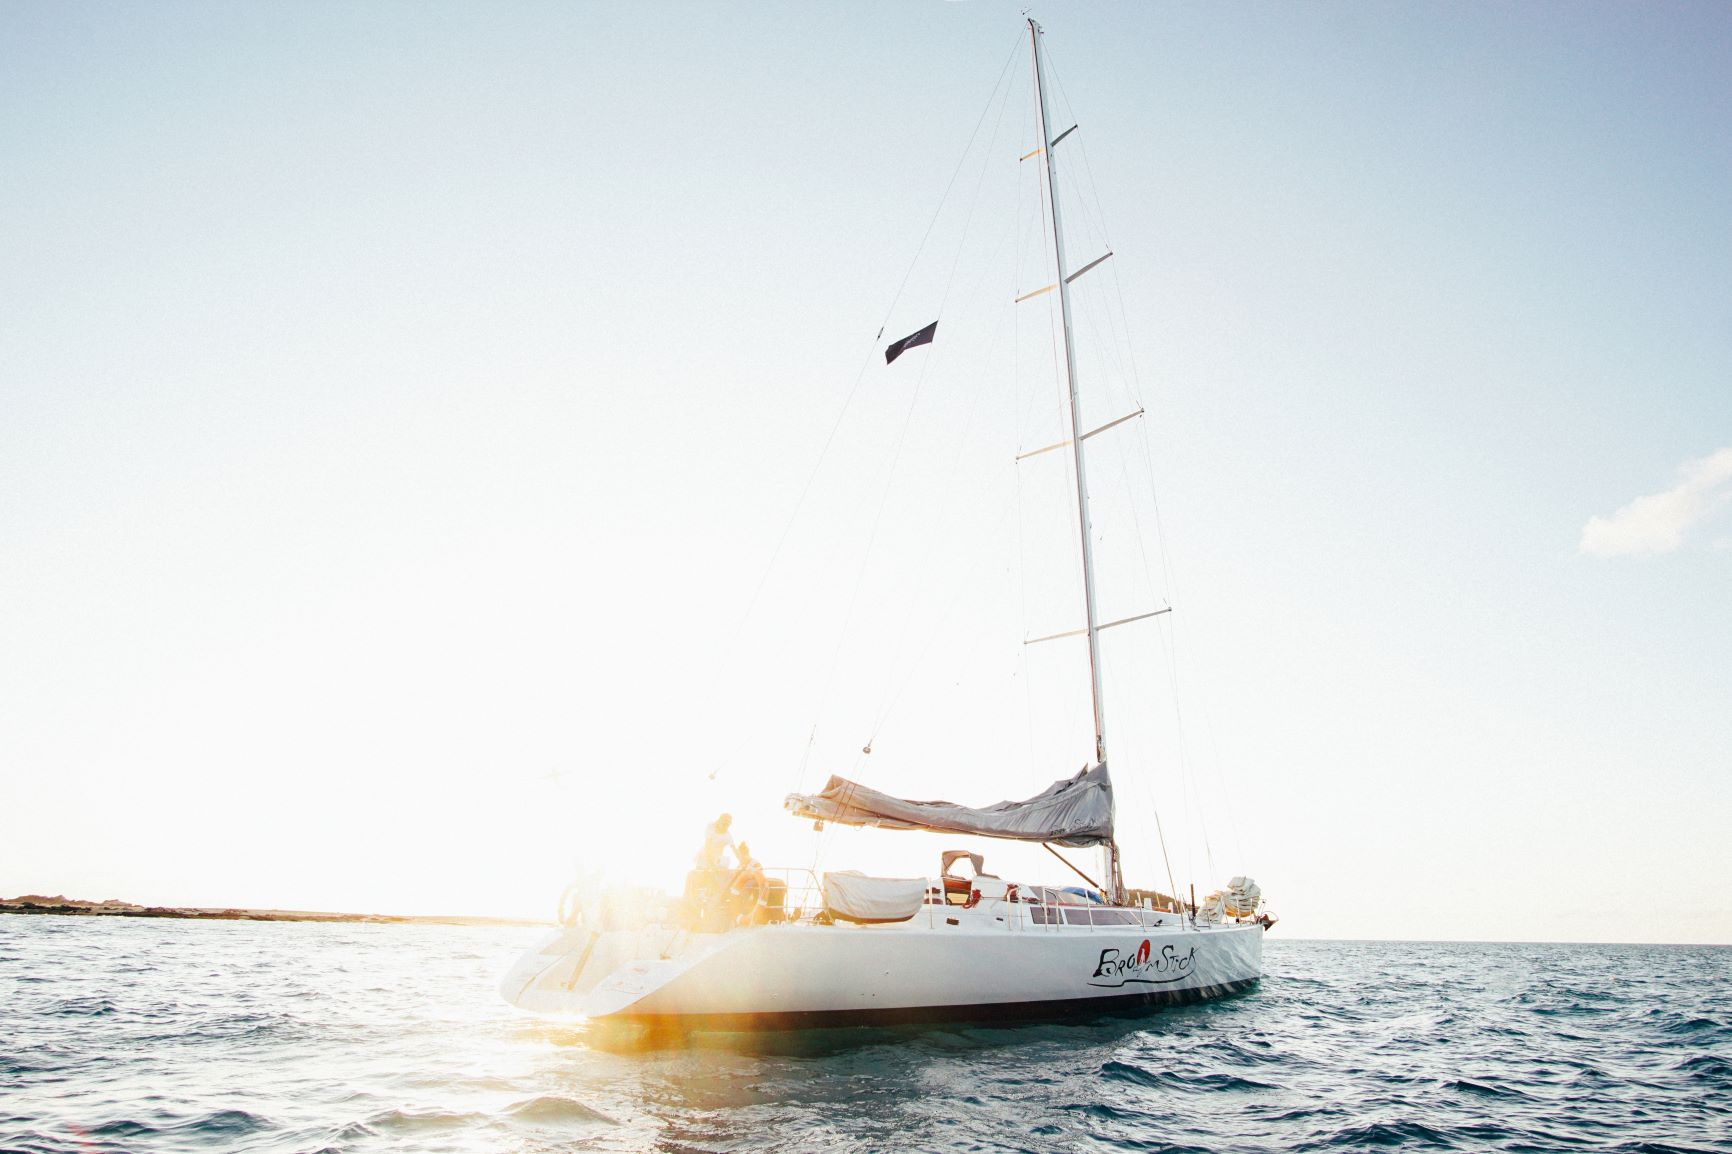 Prosail Whitsundays Private Group Charter